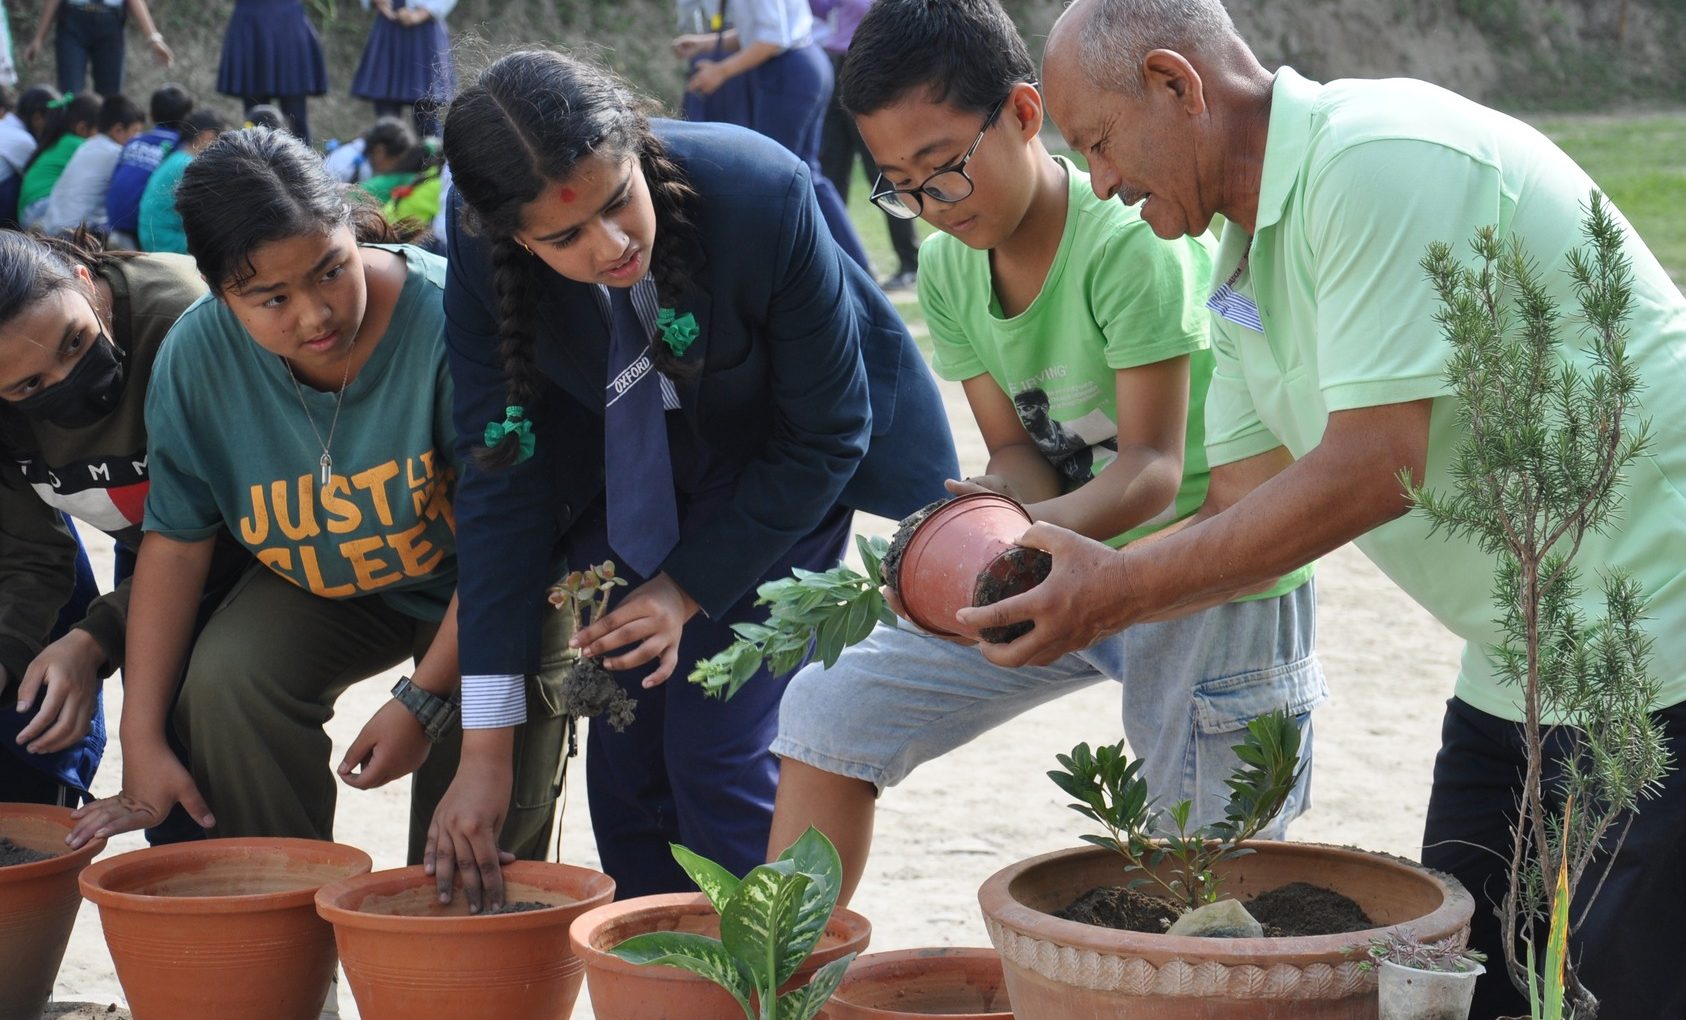 Oxford School / College promote nature conservation and greenery. We are eco-friendly.